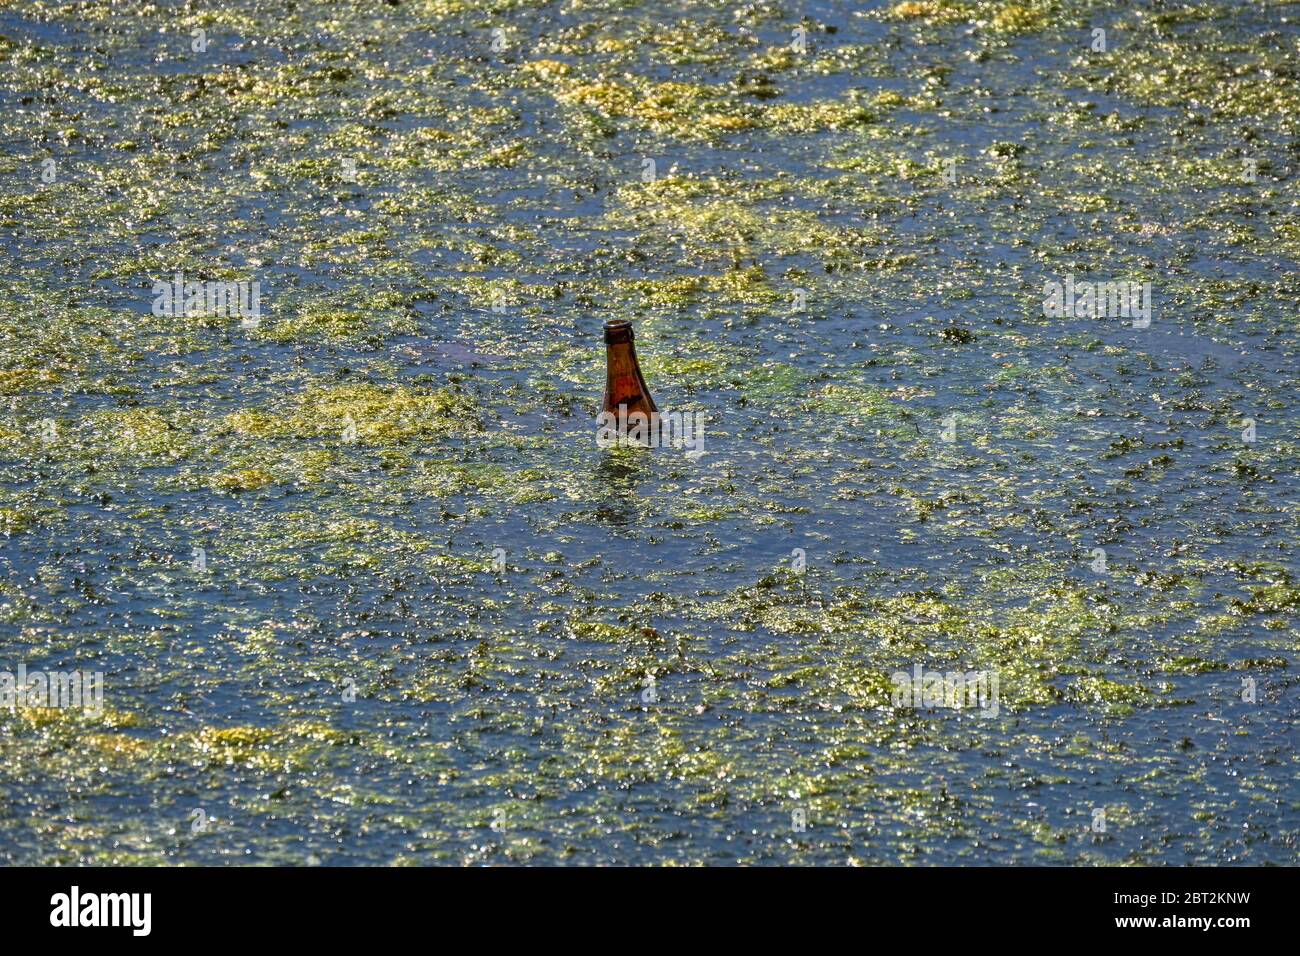 garbage, bottle disposed of in a pond full of algae. Stock Photo